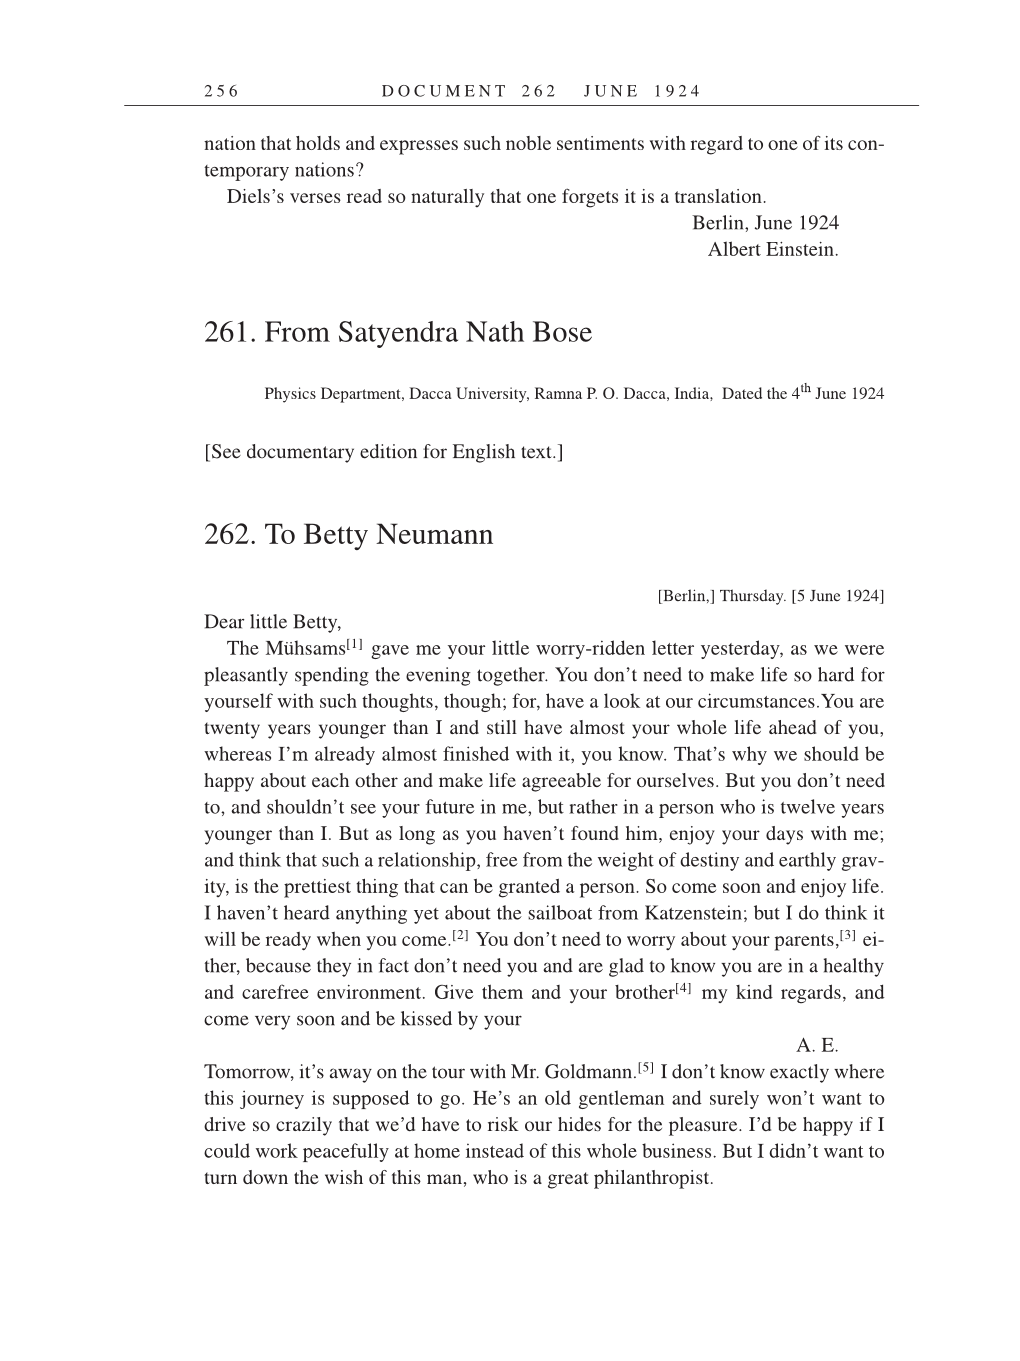 Volume 14: The Berlin Years: Writings & Correspondence, April 1923-May 1925 (English Translation Supplement) page 256